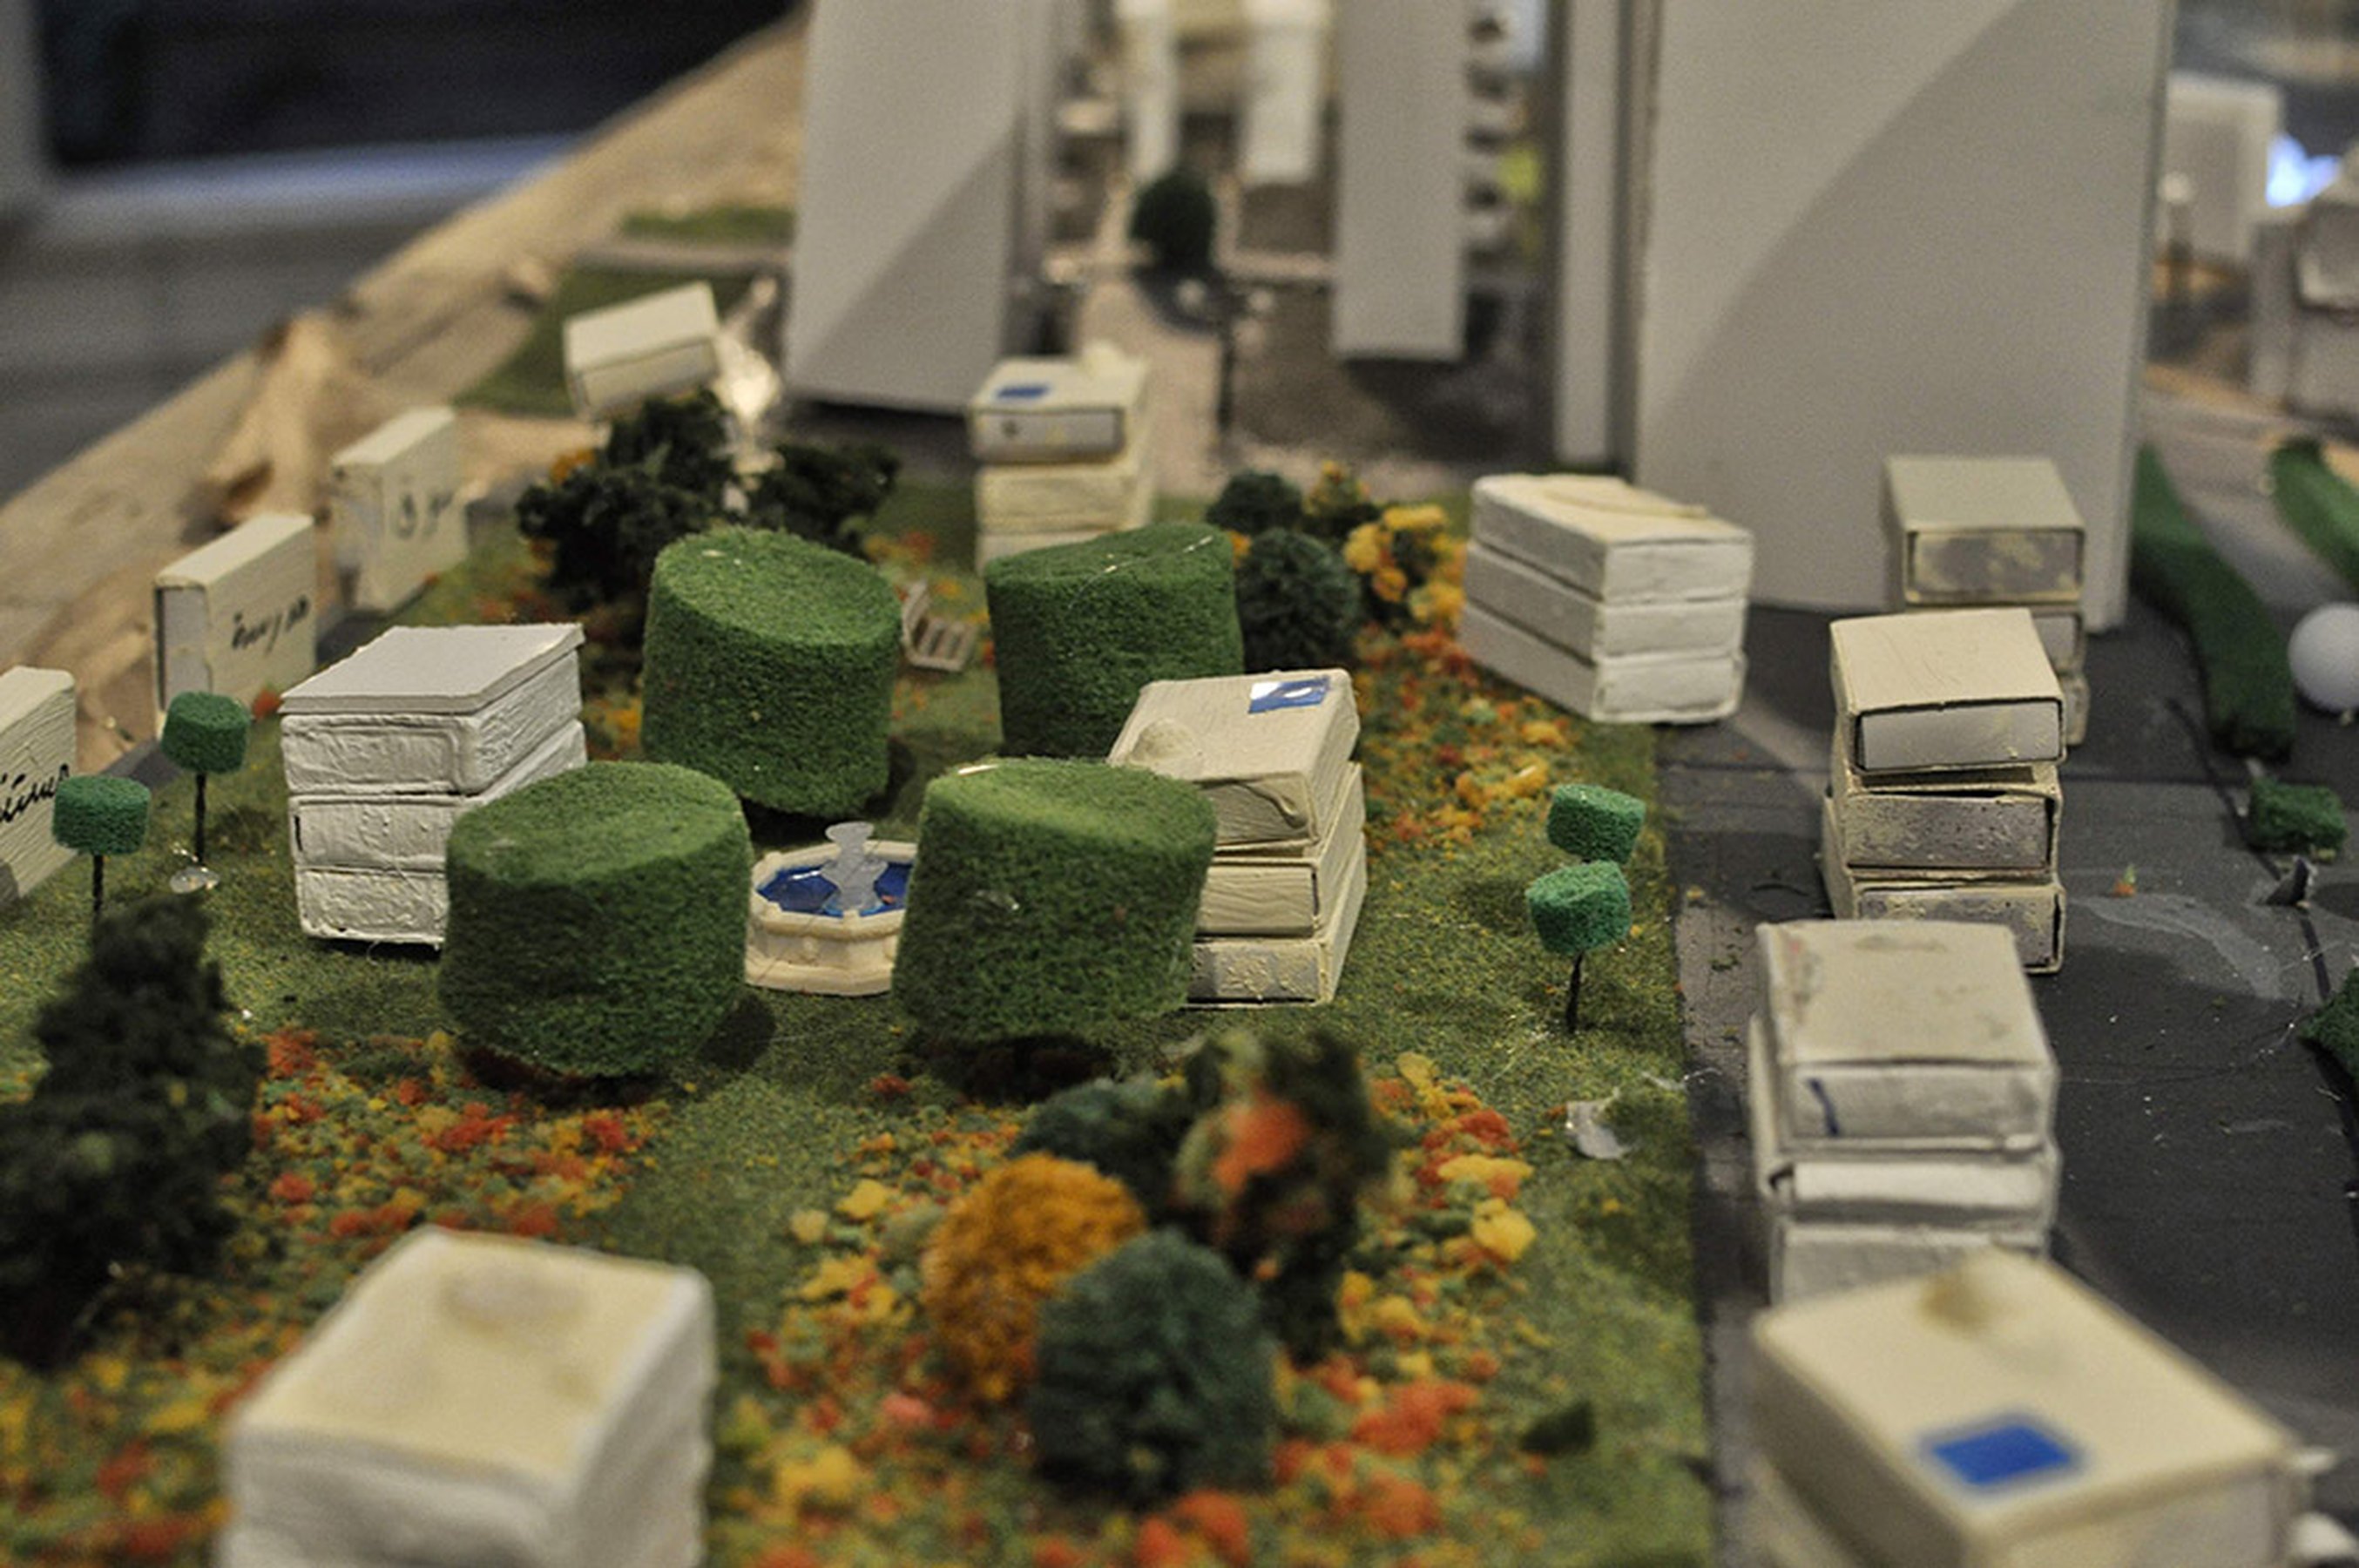 White Paper: the land, 2014 architectural model and video 175 × 265 × 125 cm; installation view at Casco, Beirut, 2014